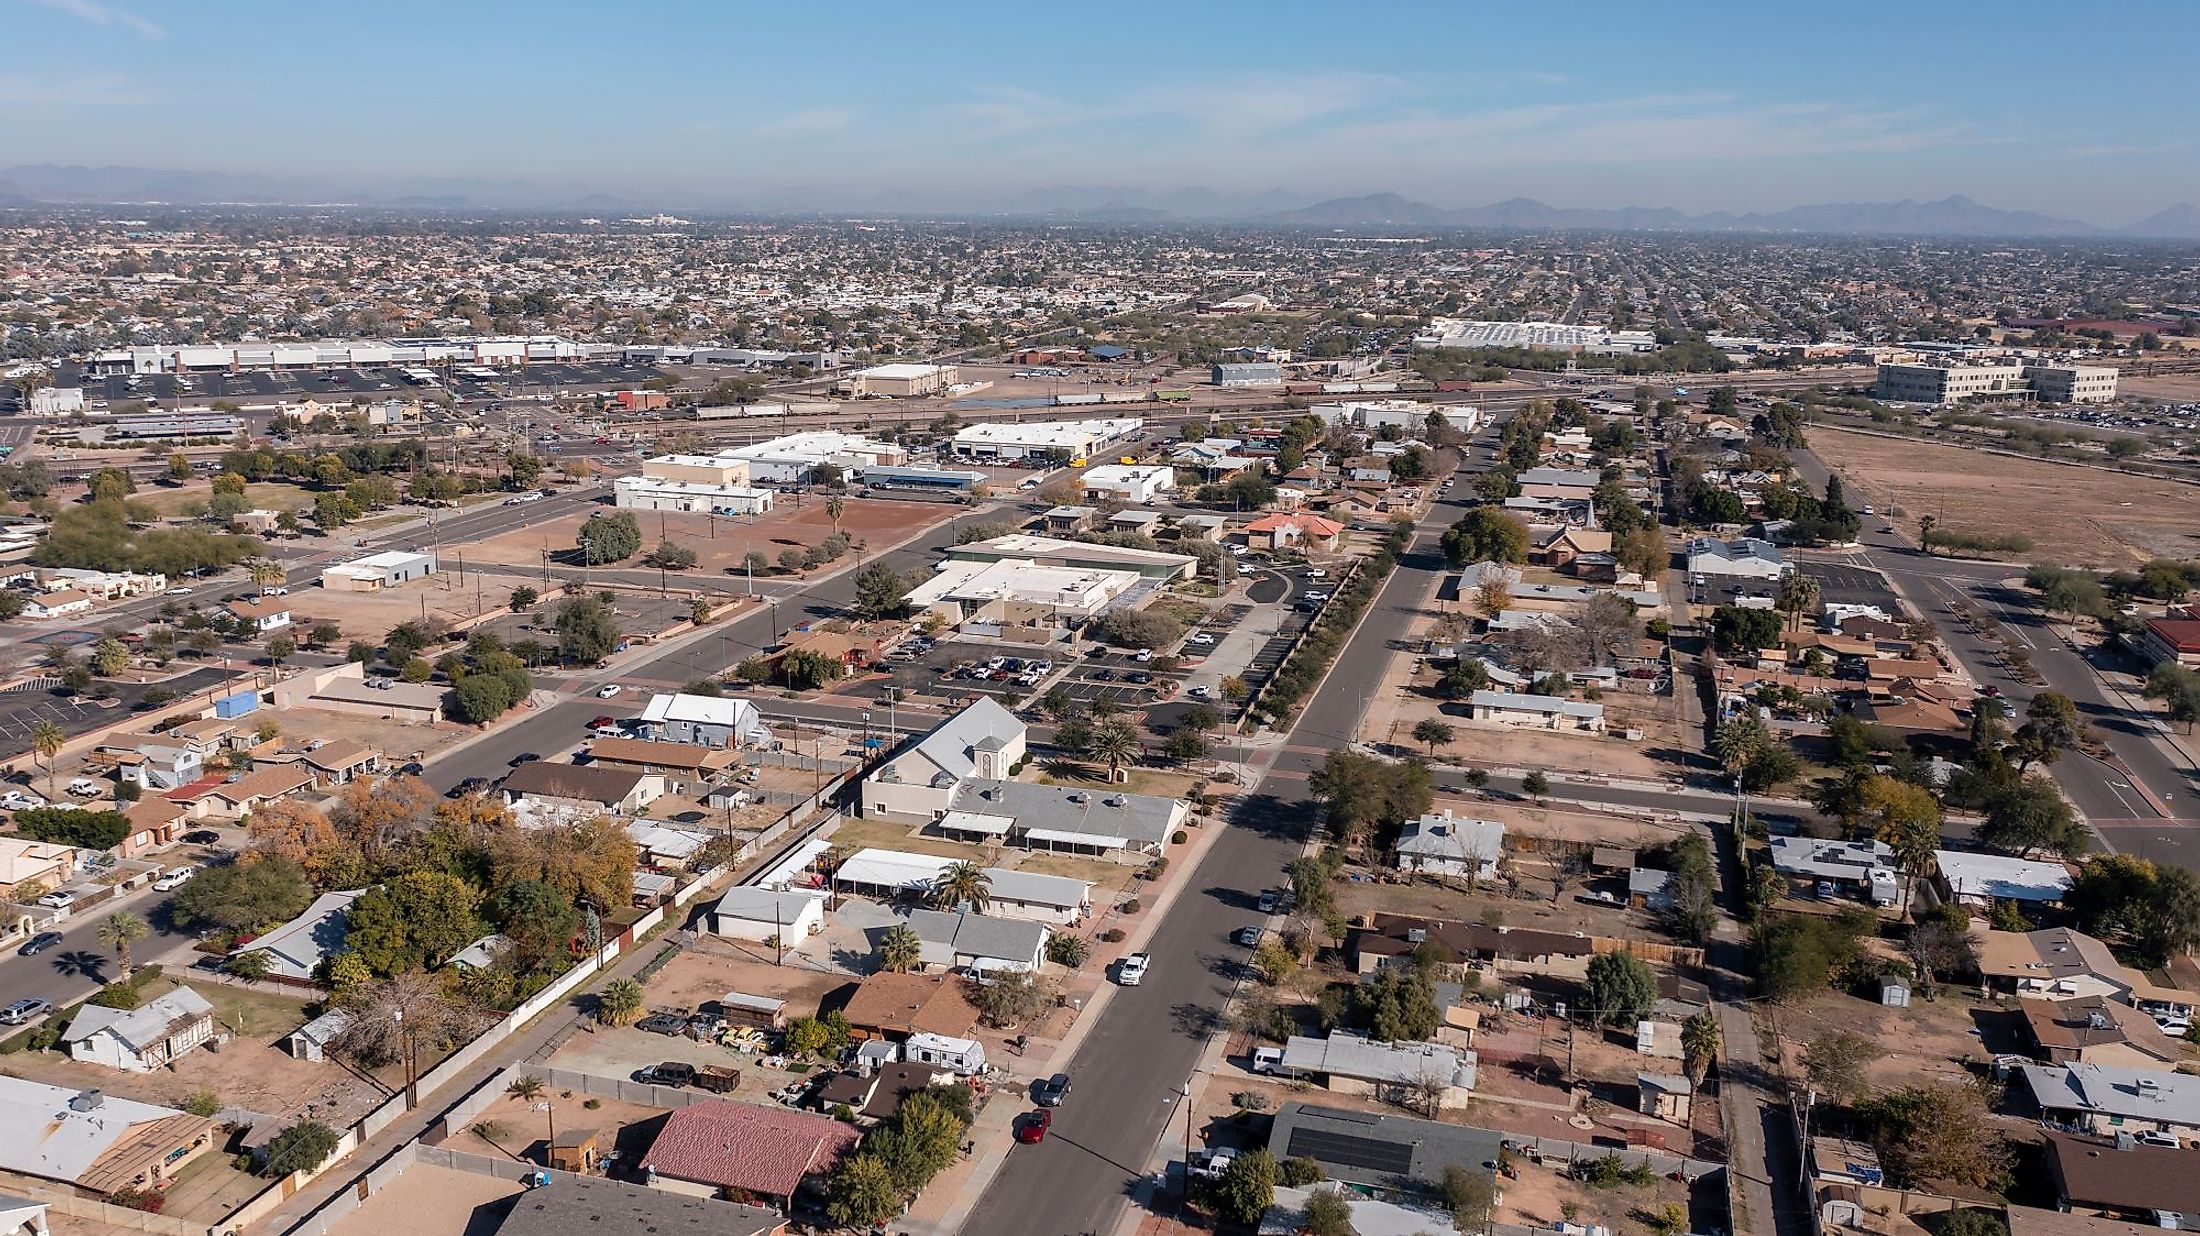 Afternoon aerial view of the downtown skyline and surrounding housing of Peoria, Arizona